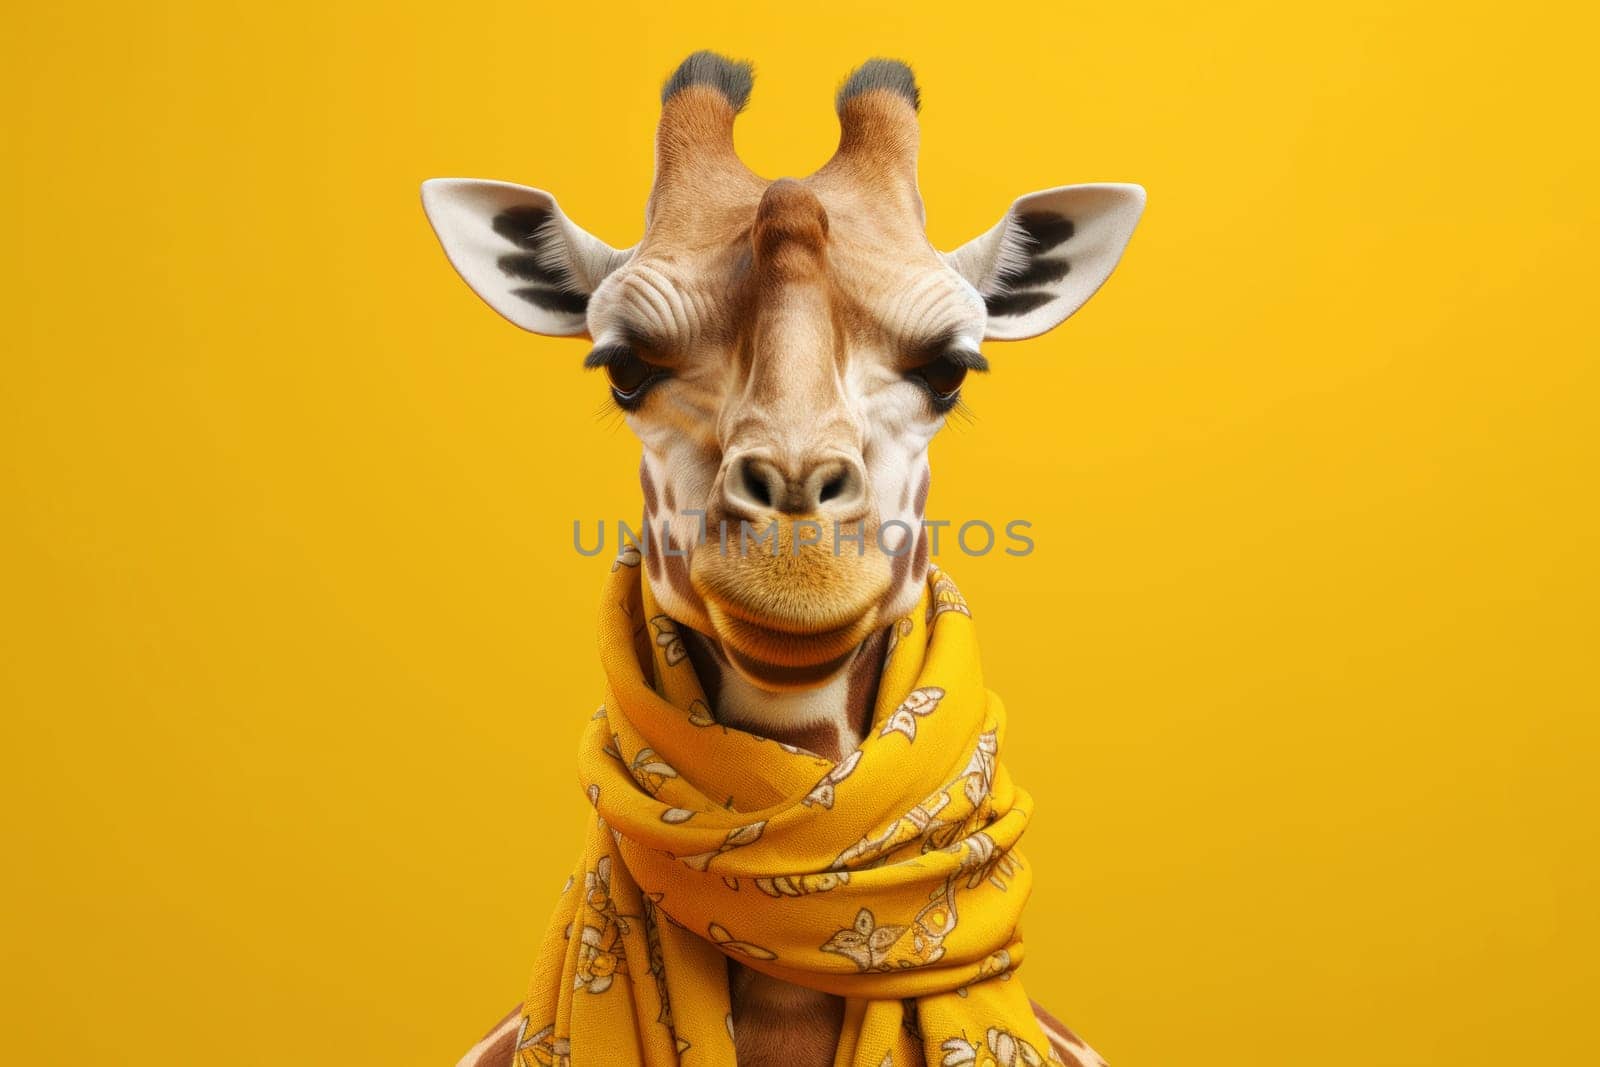 Head and neck of a cute giraffe in yellow scarf on yellow background by andreyz